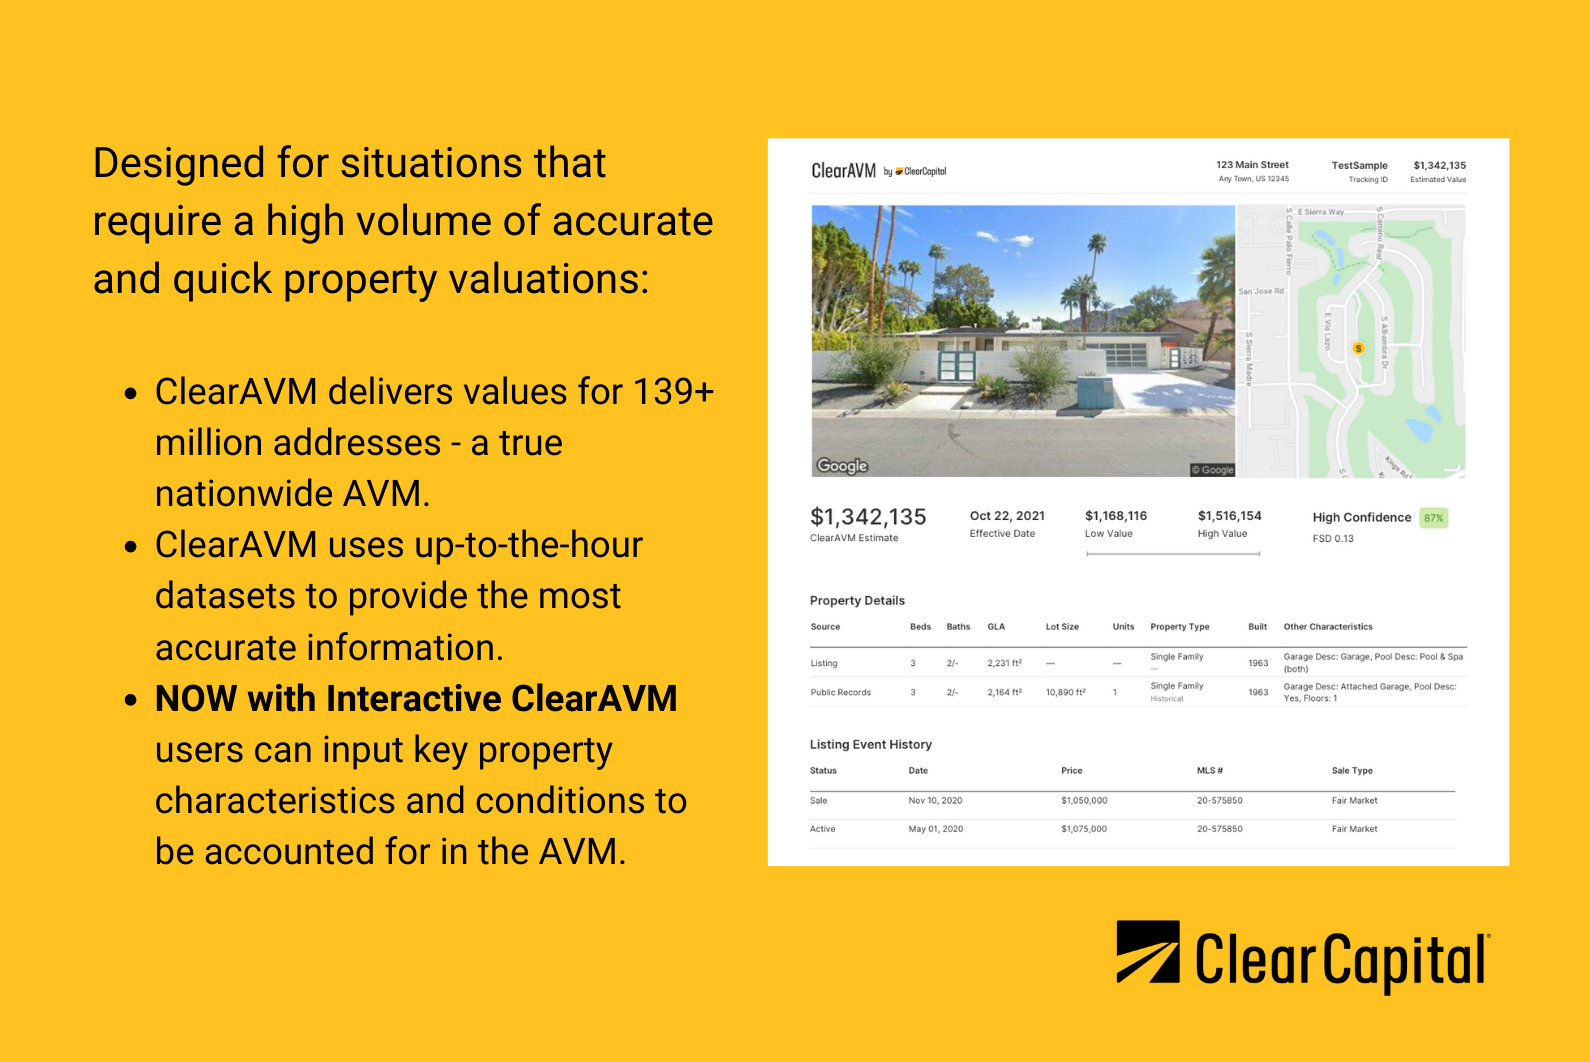 Interactive ClearAVM